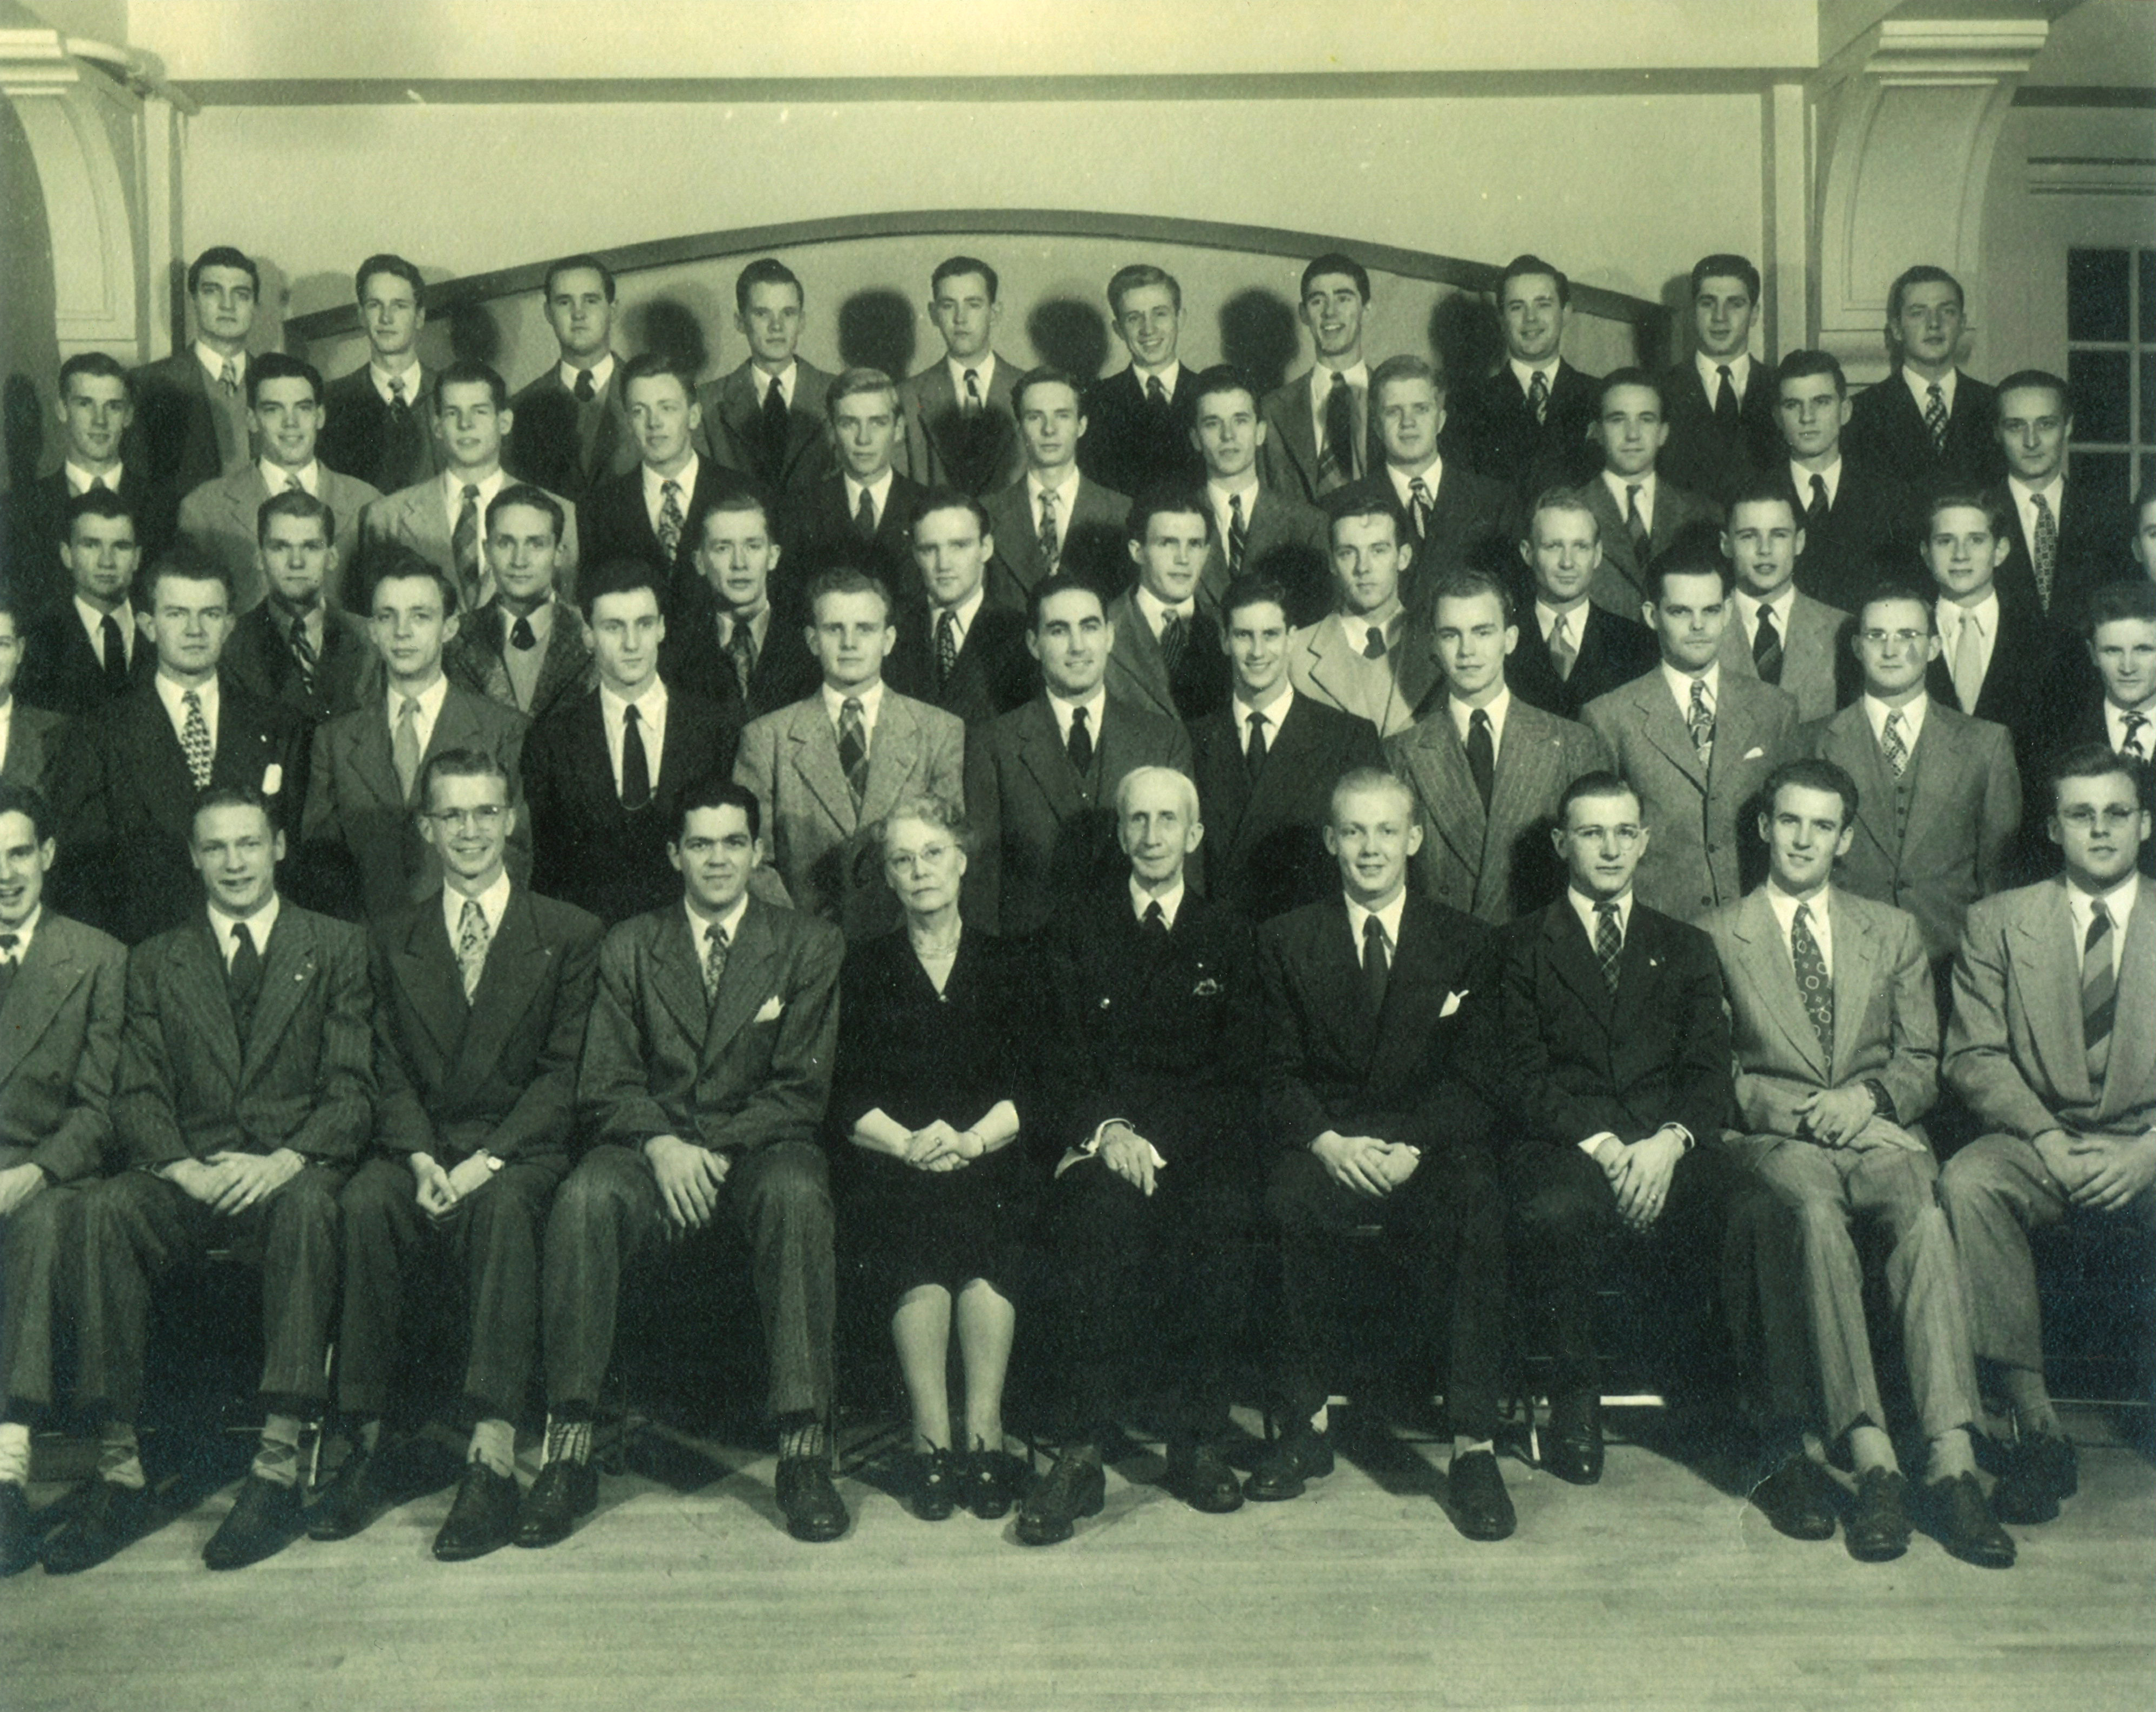 1947 Iowa Beta Chapter •	As EDA, Roger Strand sits next to Dean Wilber J. Teeters while the EA sits next to the House Mother